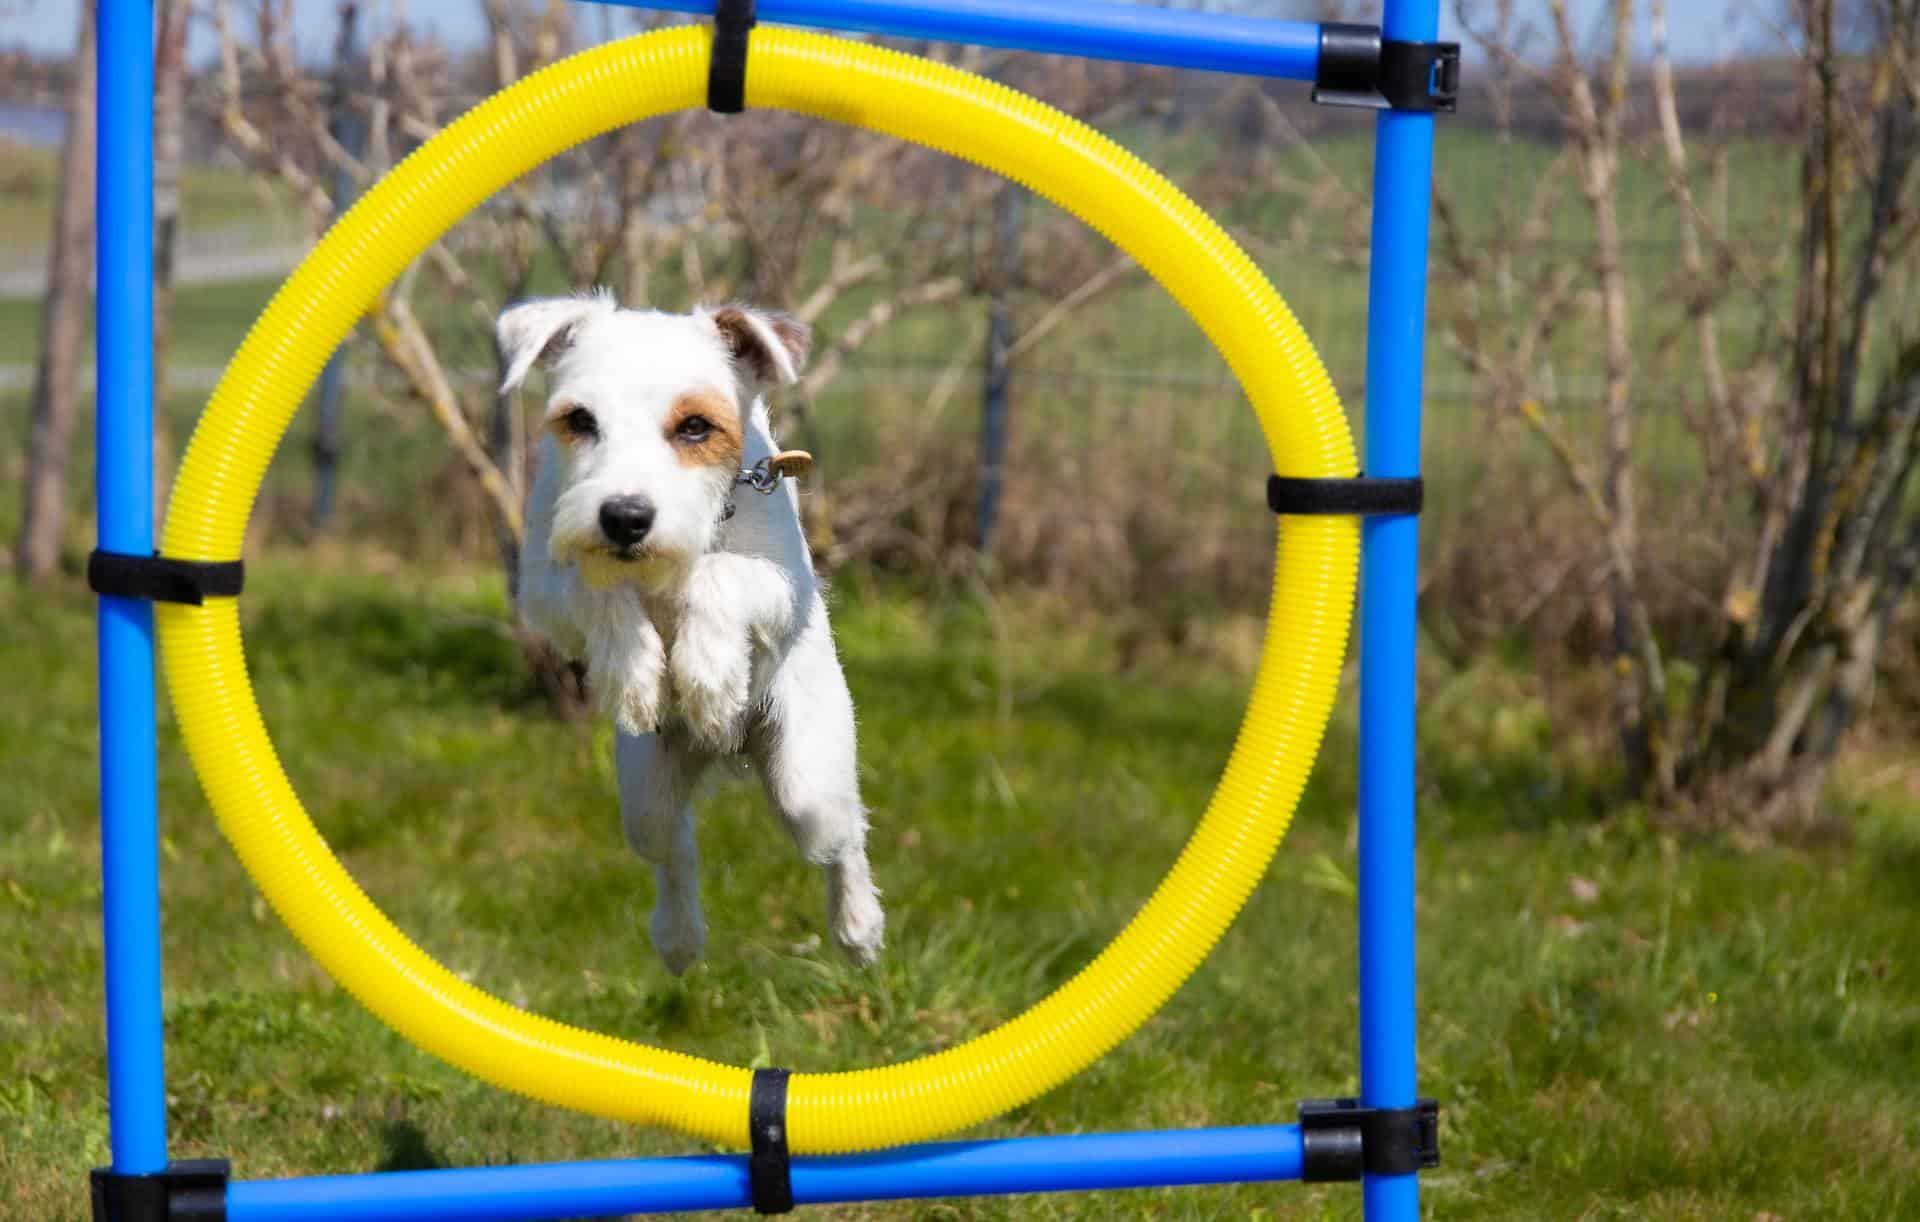 Best Dog Treadmill And Other Agility Equipment - Dogschool.com